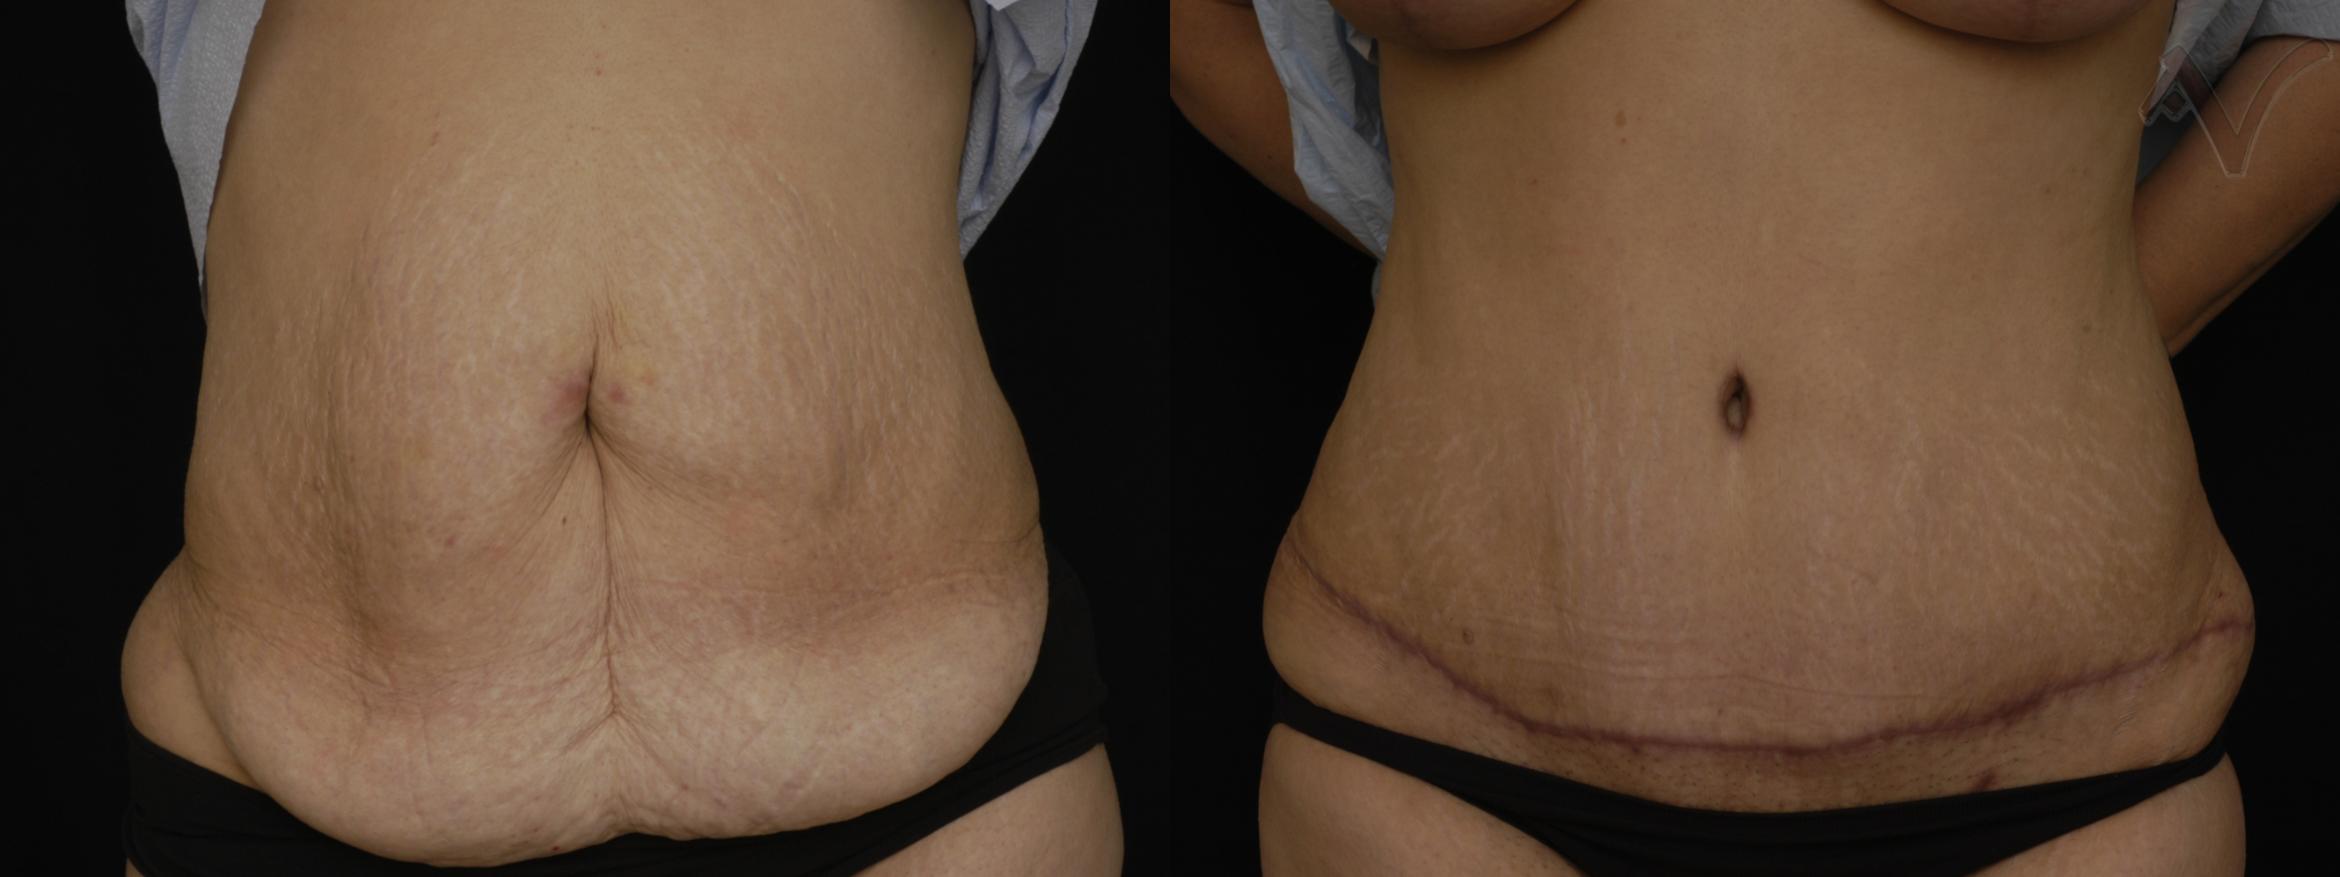 Before & After Abdominoplasty after Massive Weight Loss Case 201 Front View in Burbank, CA